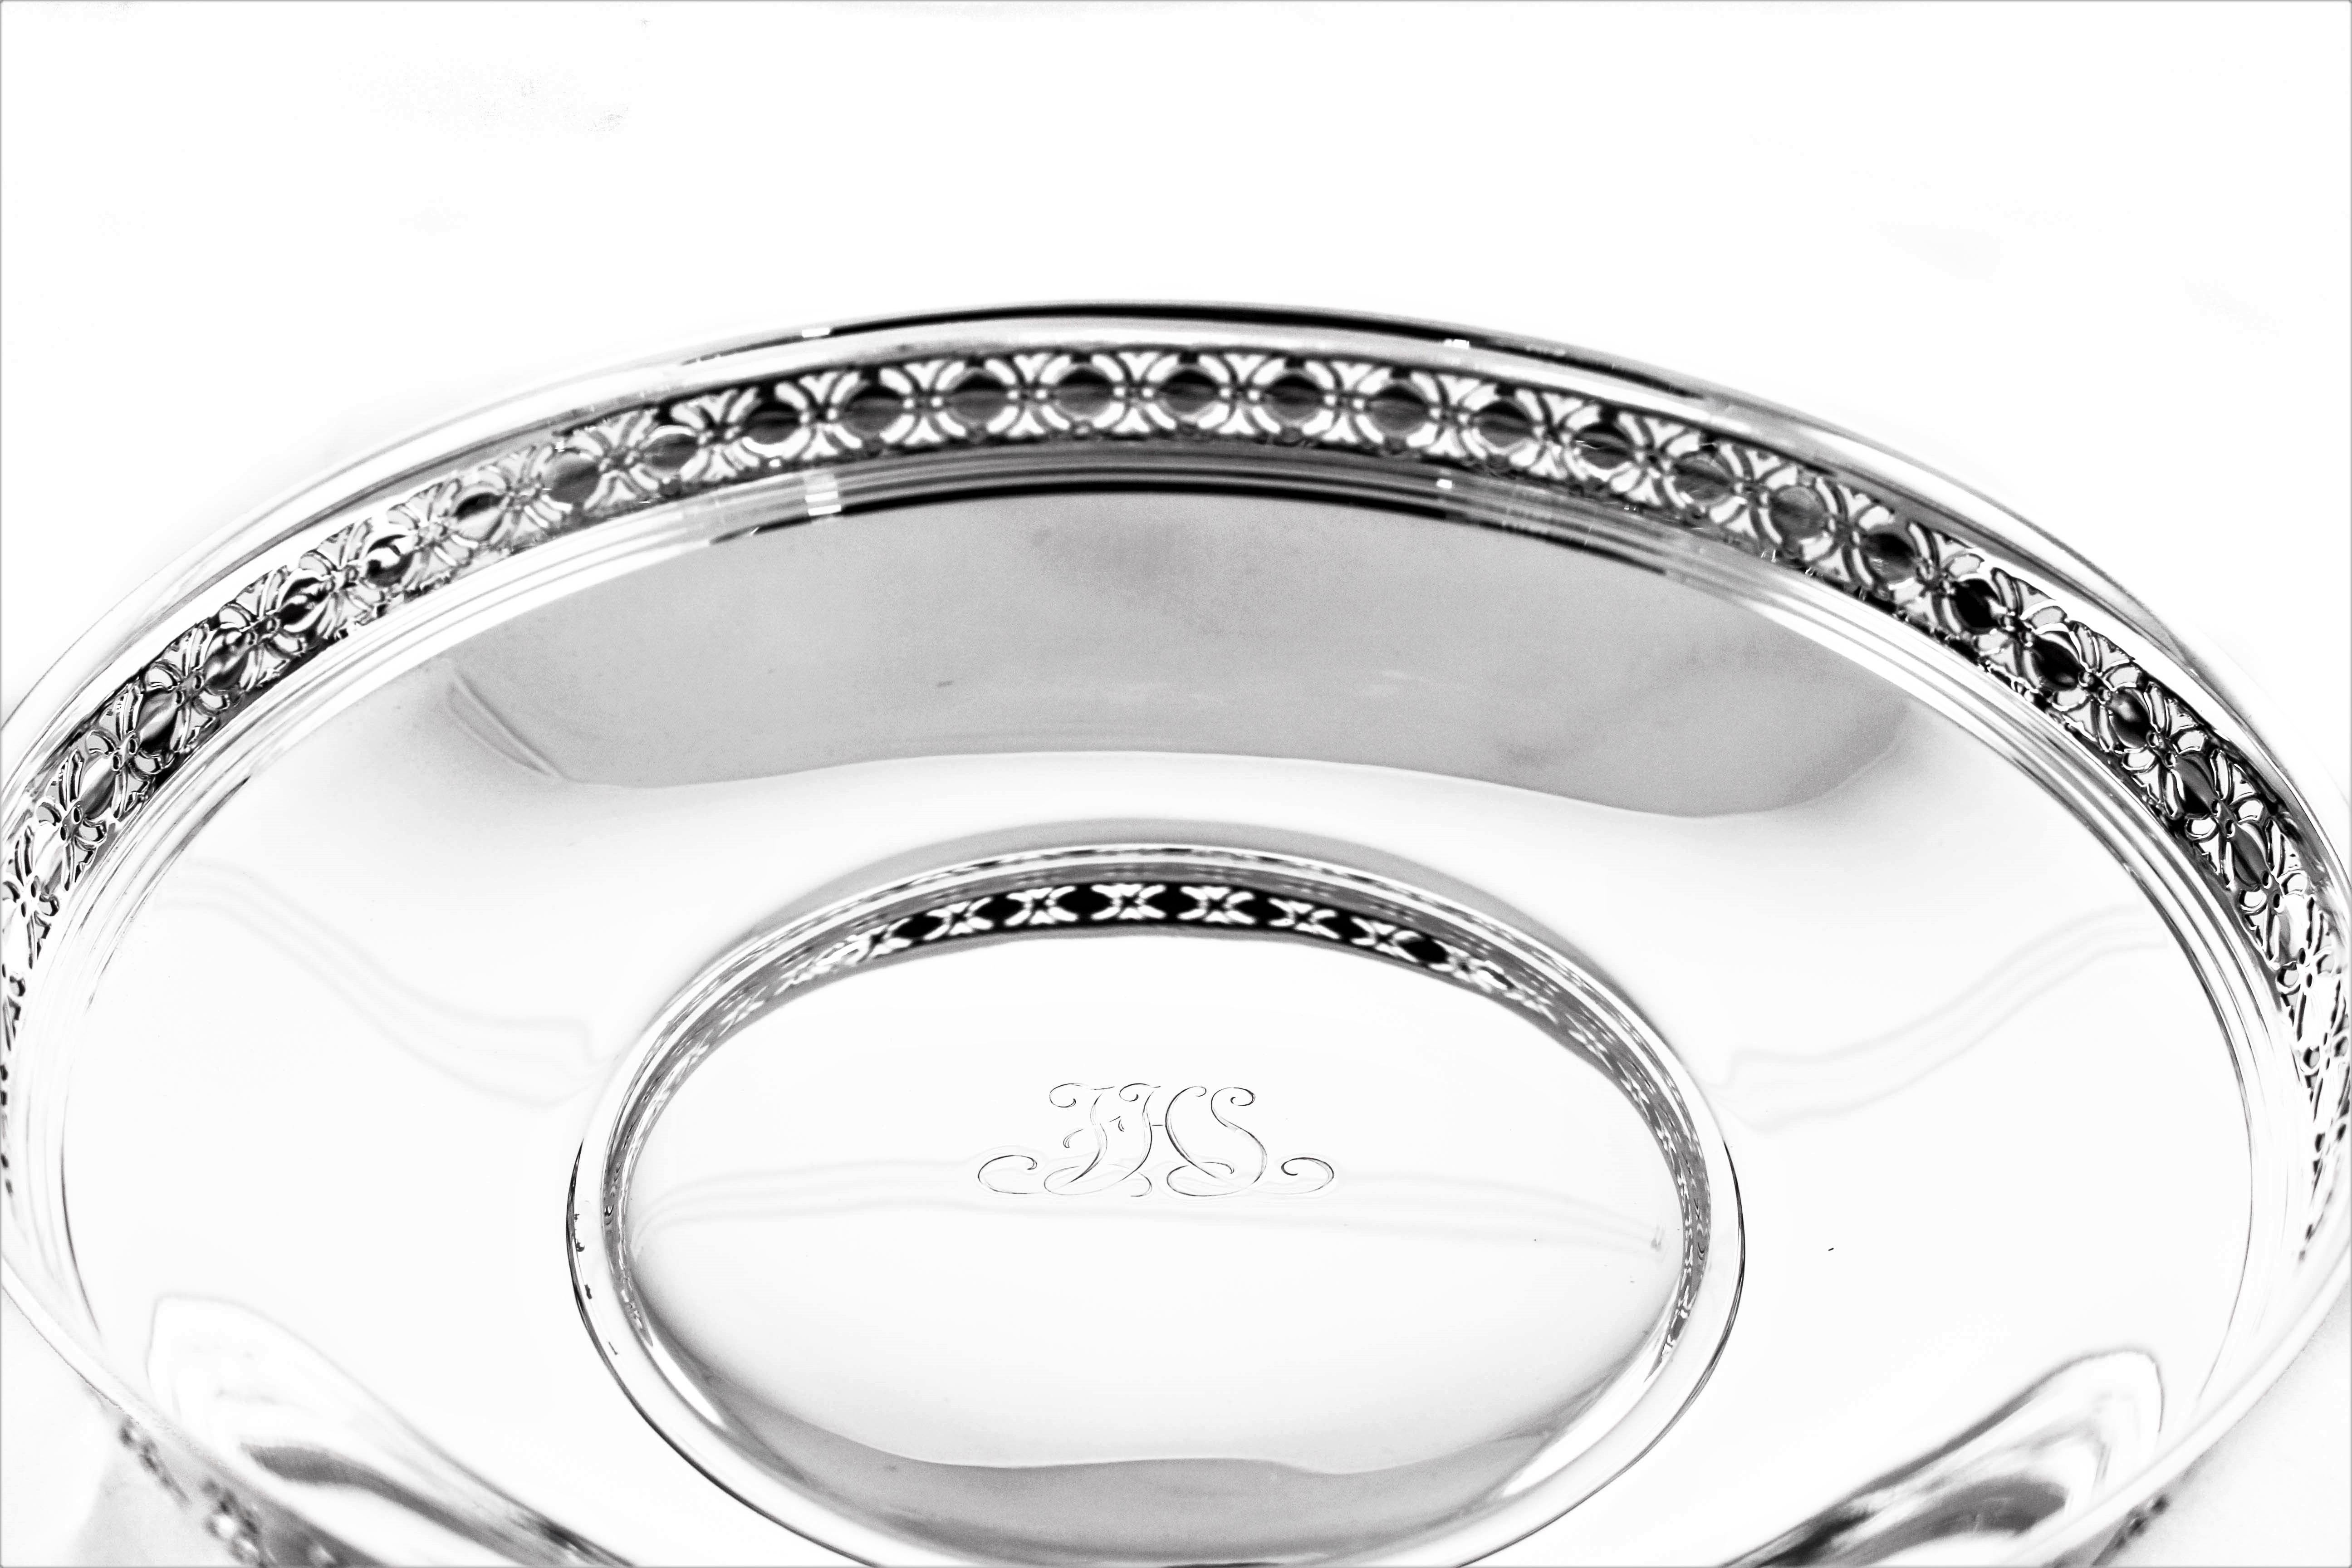 This reticulated bowl by Tiffany and Company has a cut-out design around the edge. It has a curved shape on the sides and nice depth. In the centre a hand engraved monogram in that distinctive Tiffany style.
    